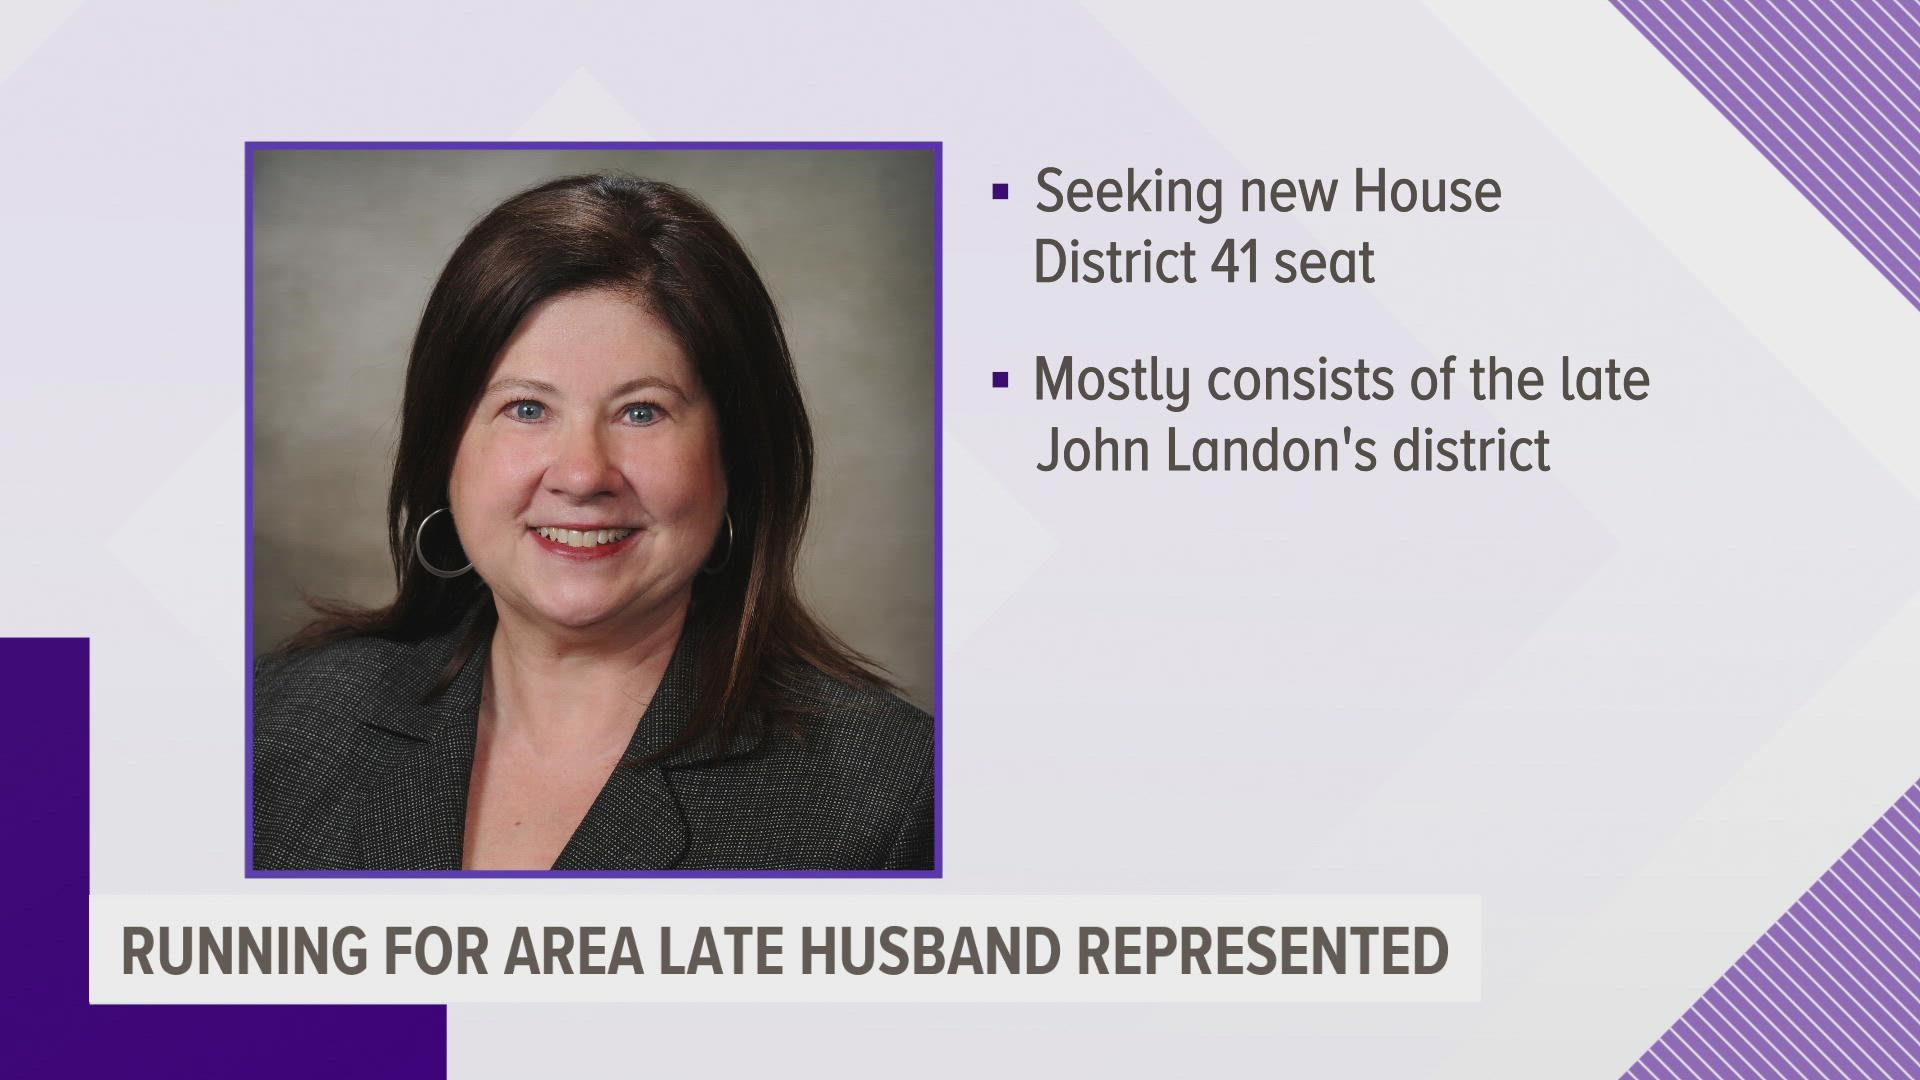 The Republican is running for the new House District 41 seat, which encompasses most of her late husband's district.